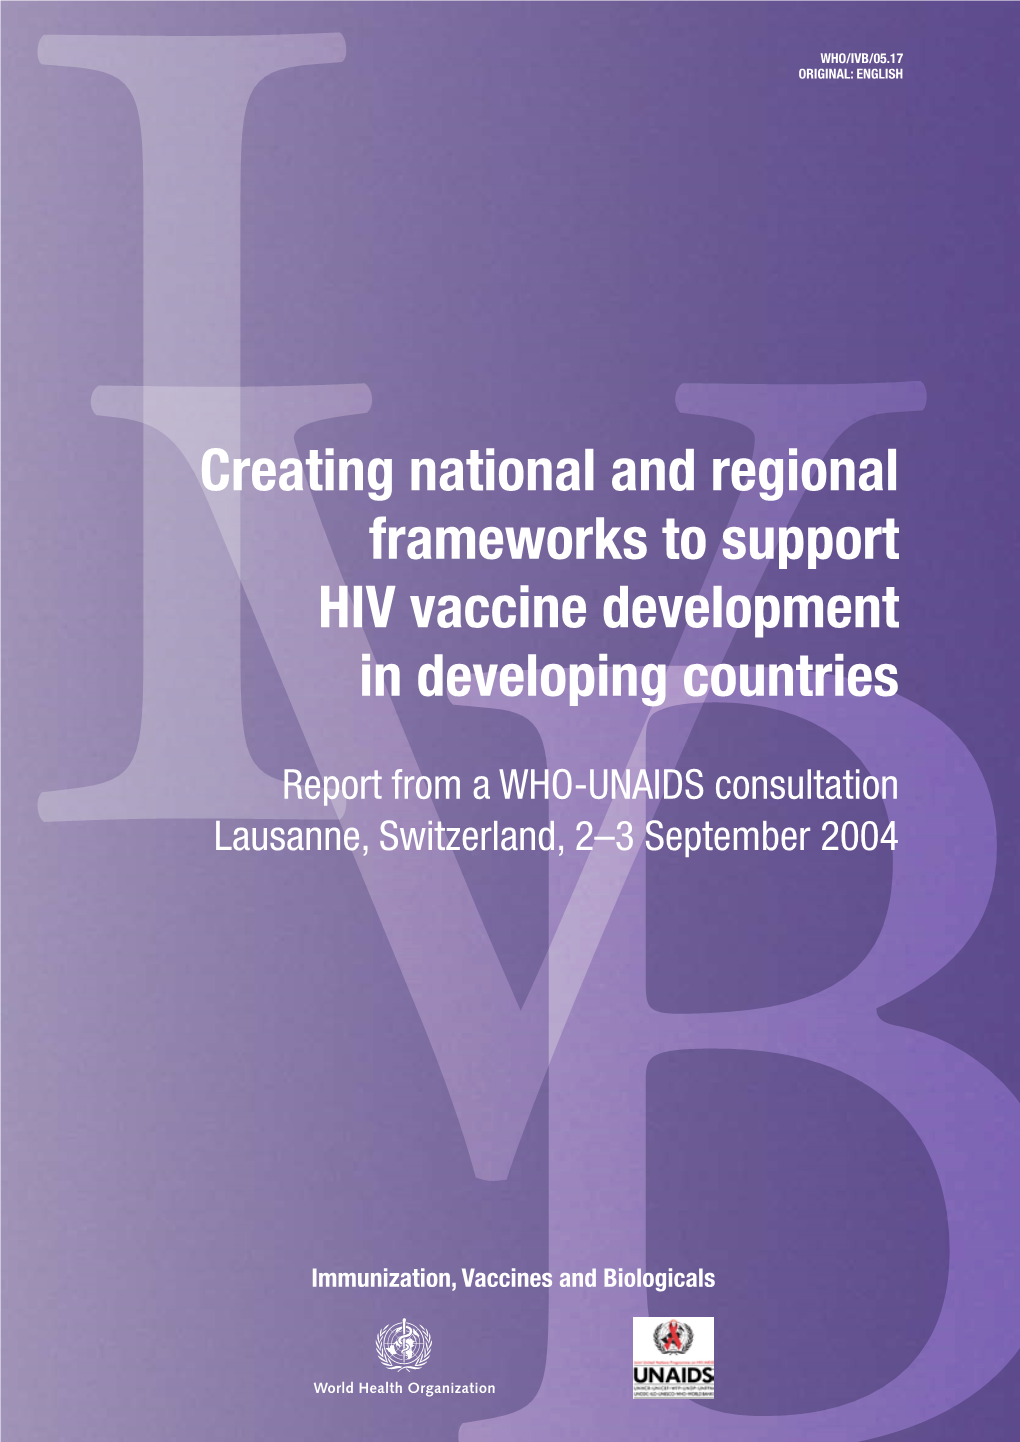 Creating National and Regional Frameworks to Support HIV Vaccine Development in Developing Countries